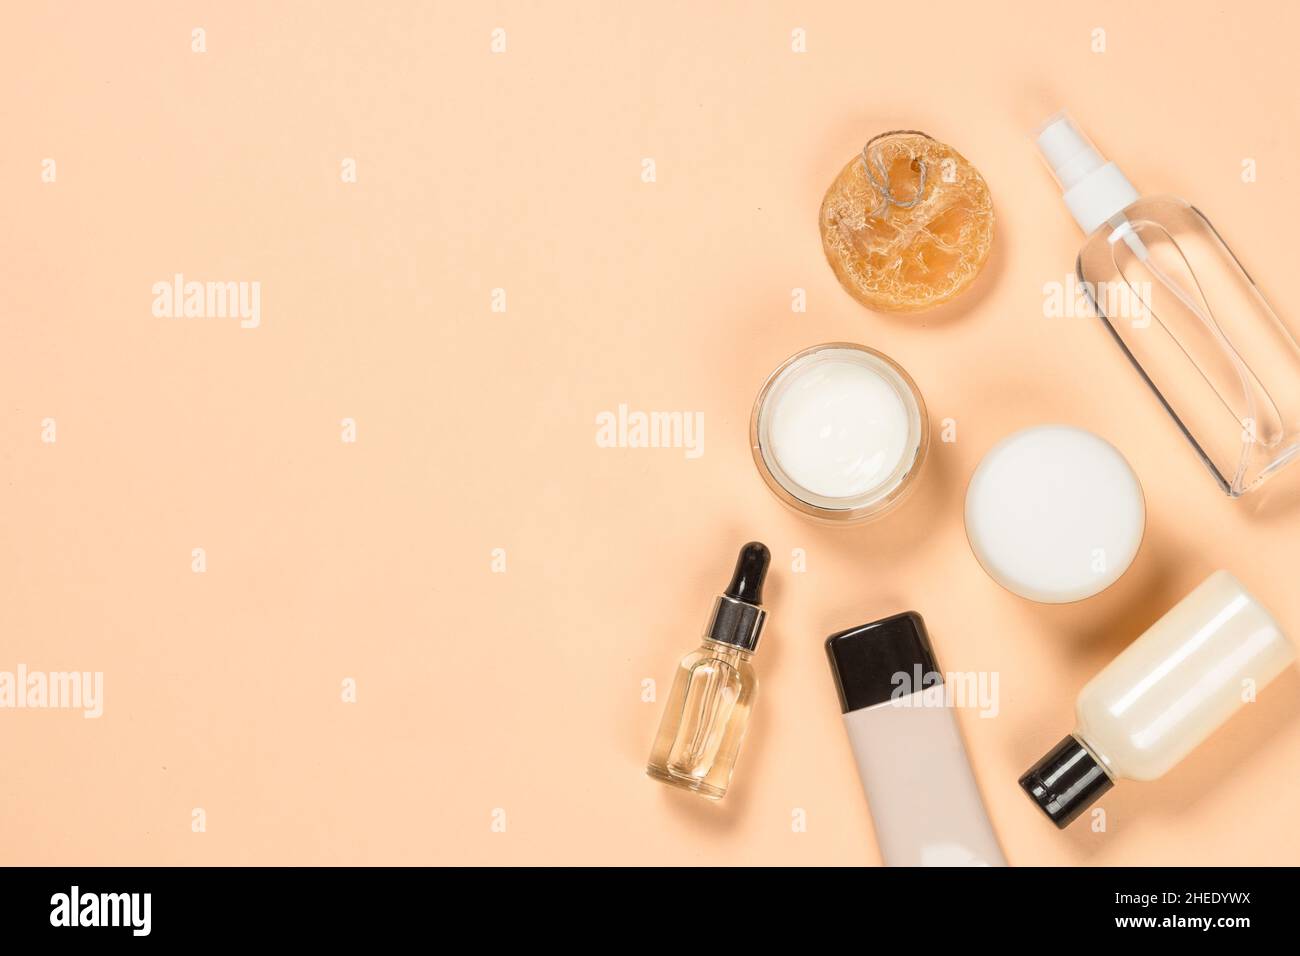 Spa and wellness products at trendy beige background. Stock Photo